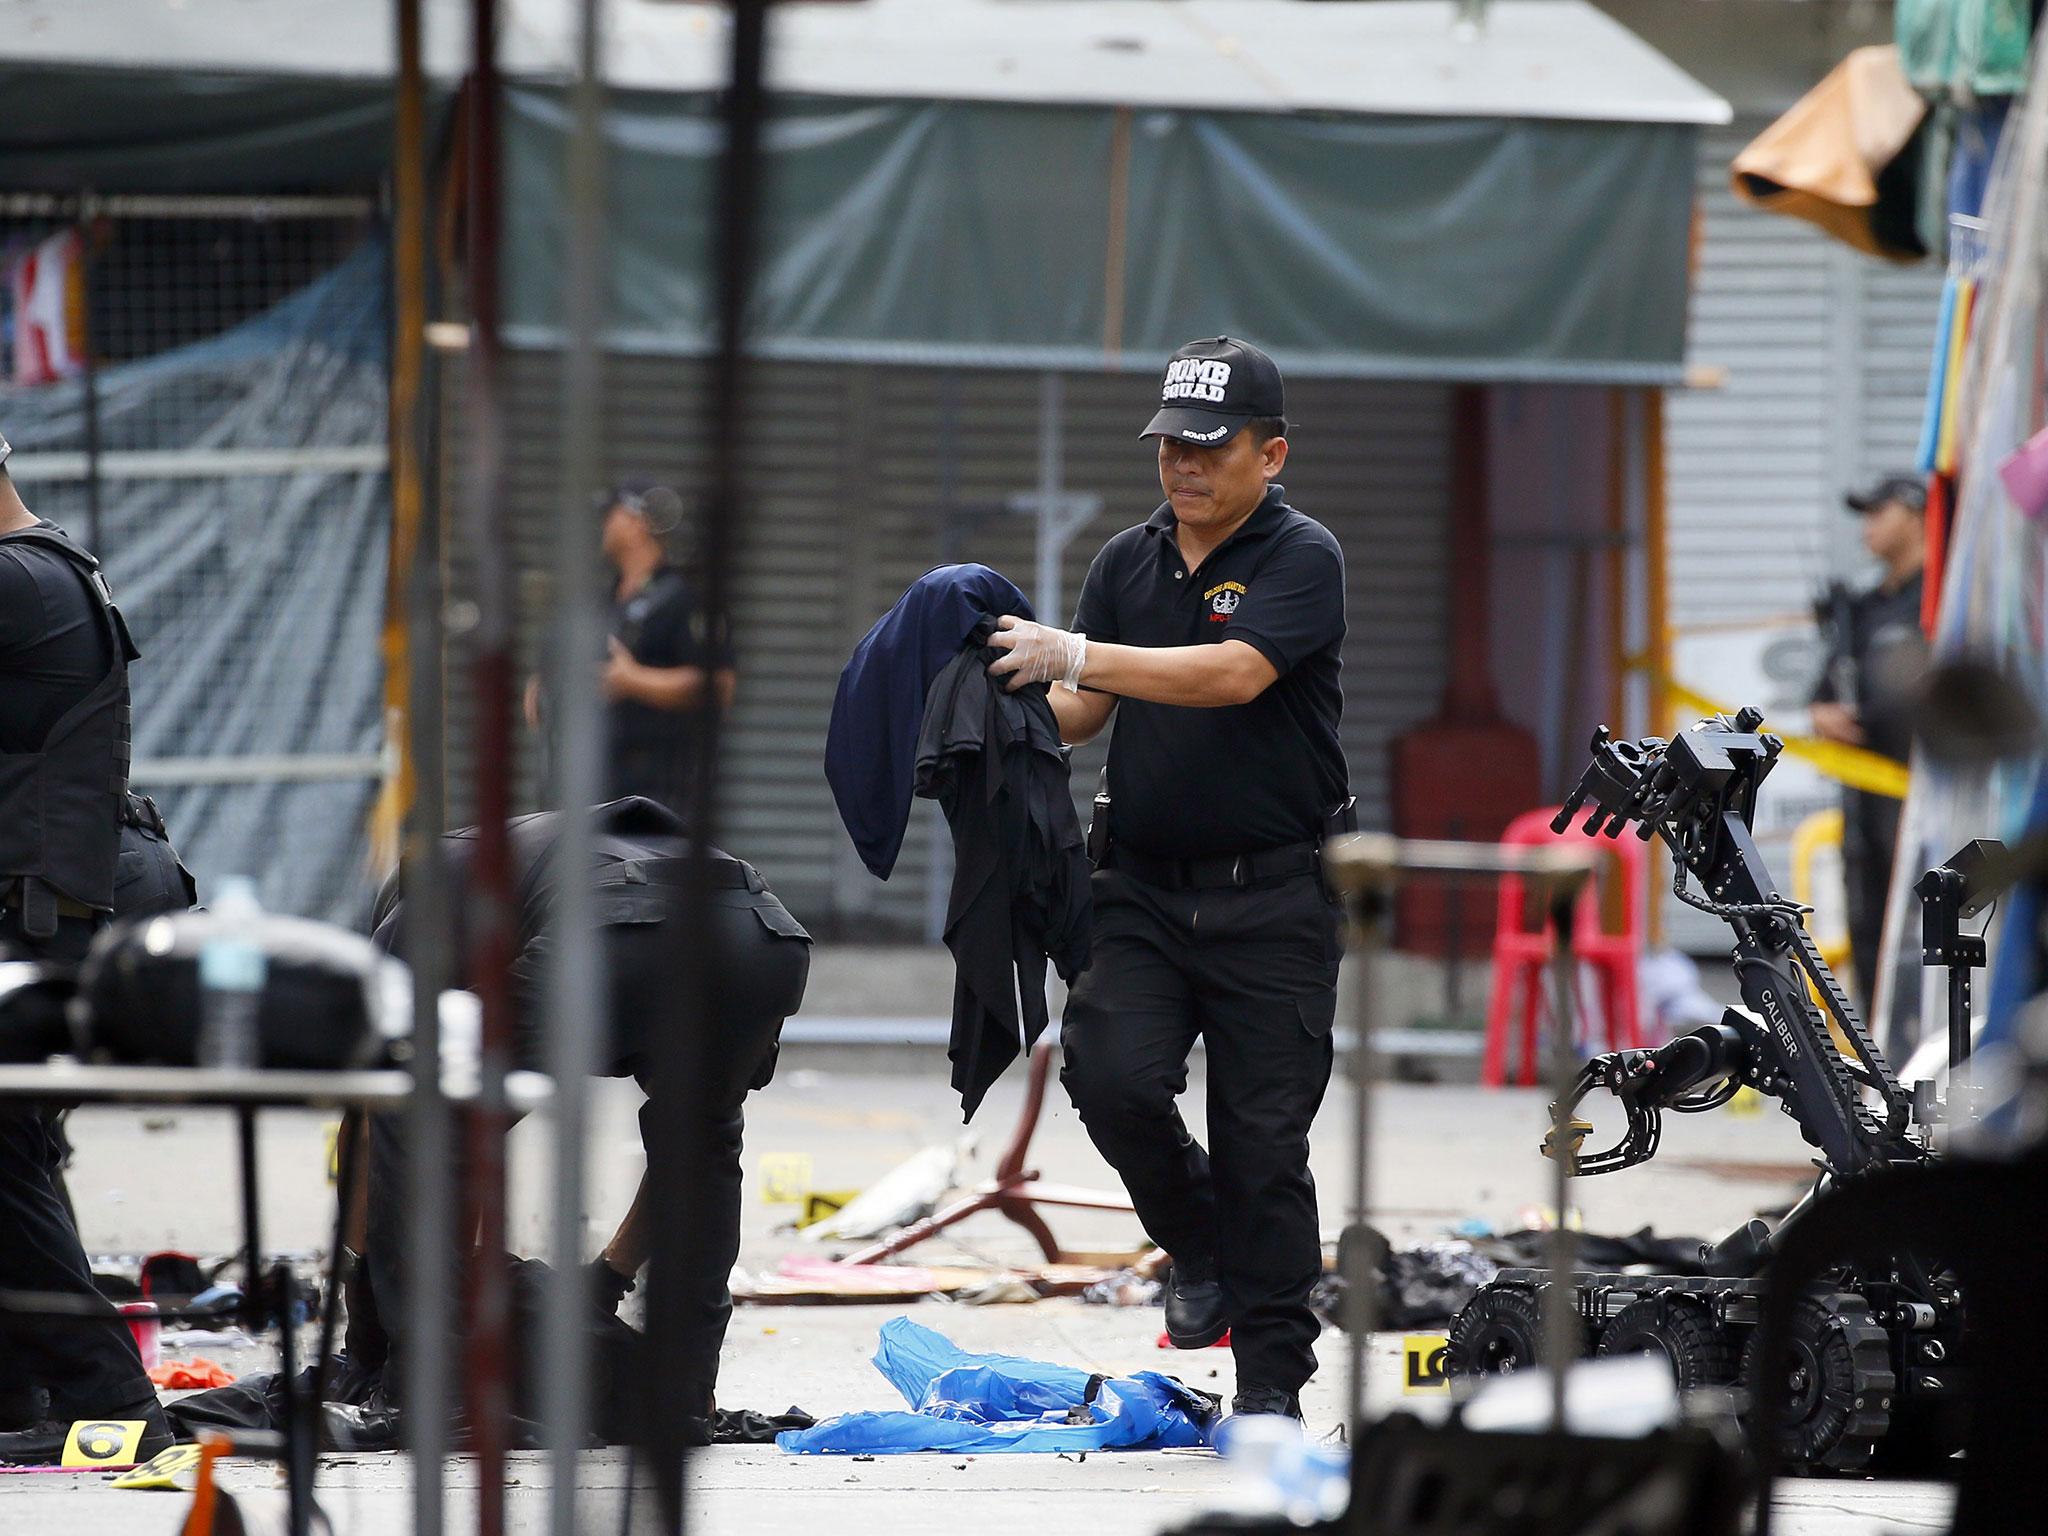 Bomb squad officers remove items from the scene of yesterday's bombing